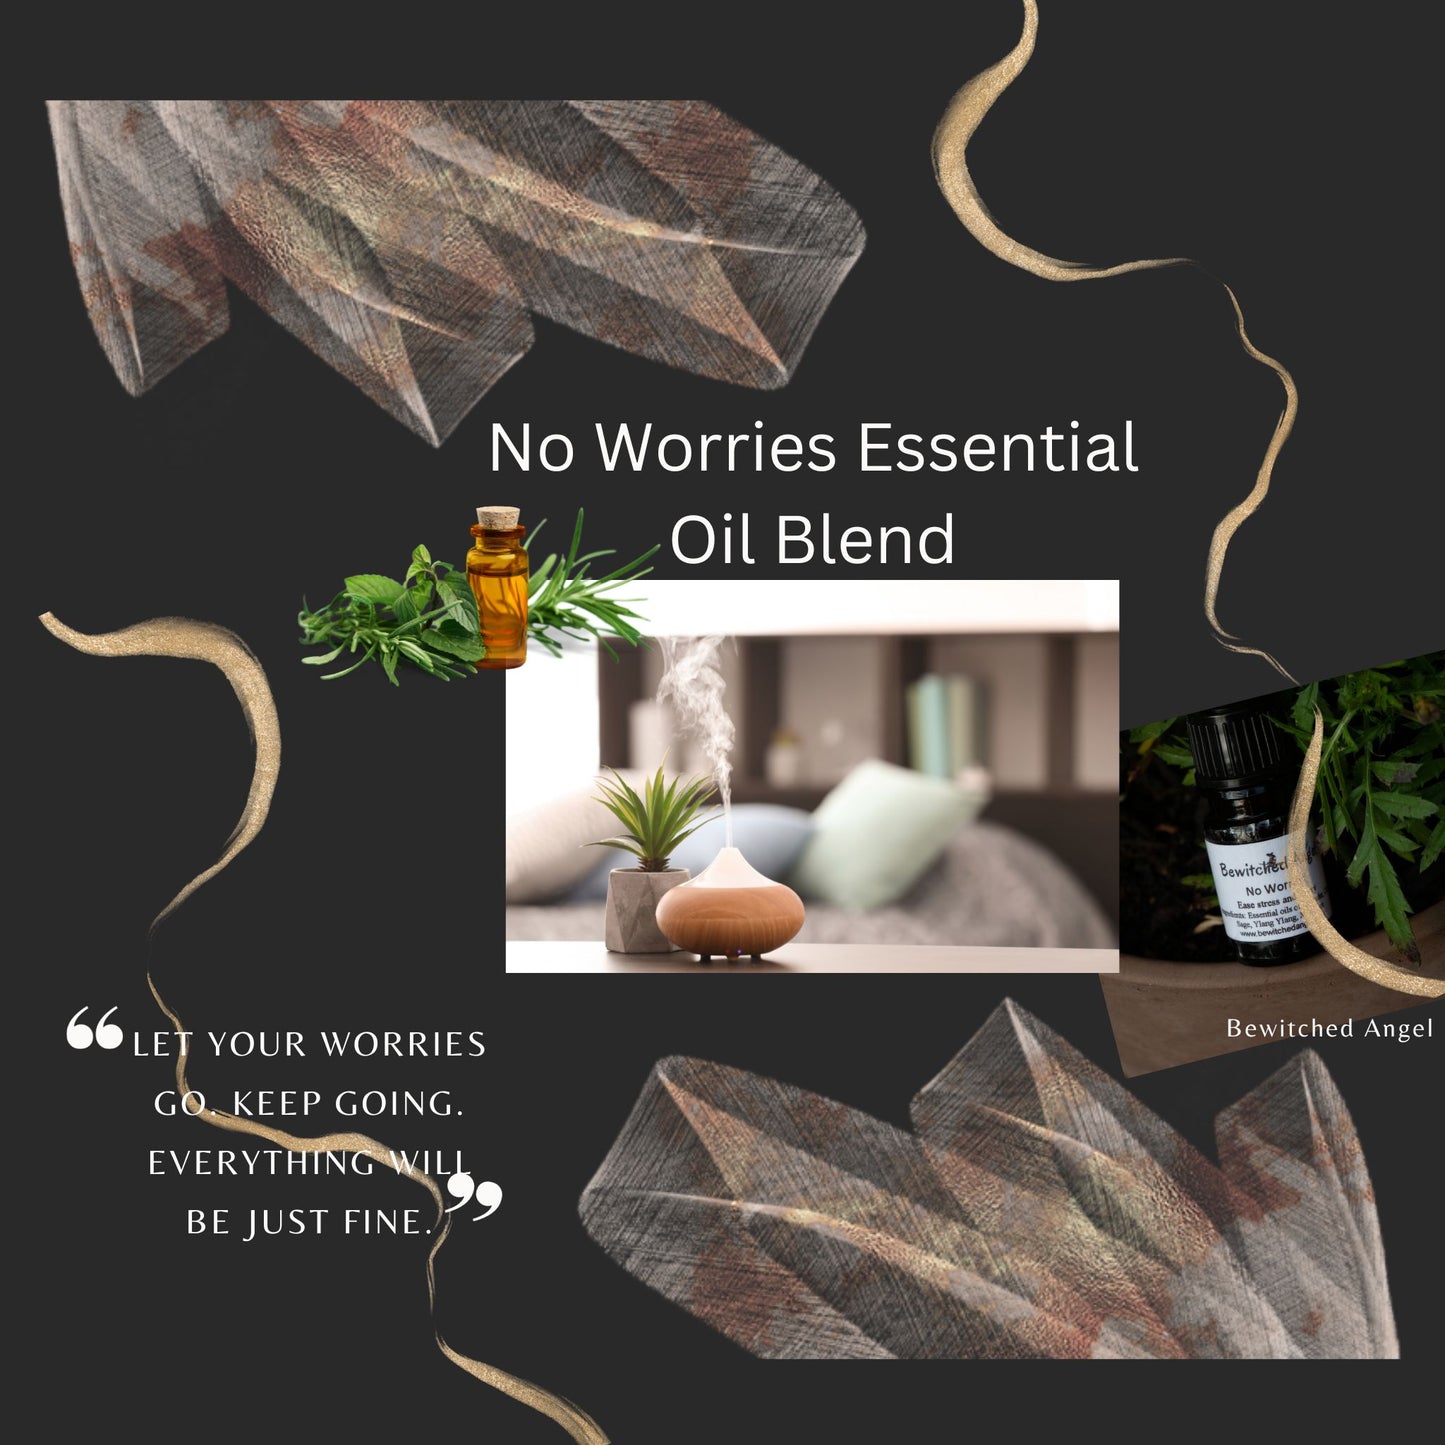 Essential Oil Blend - "No Worries" - Anxiety, Worry & Stress Release Blend